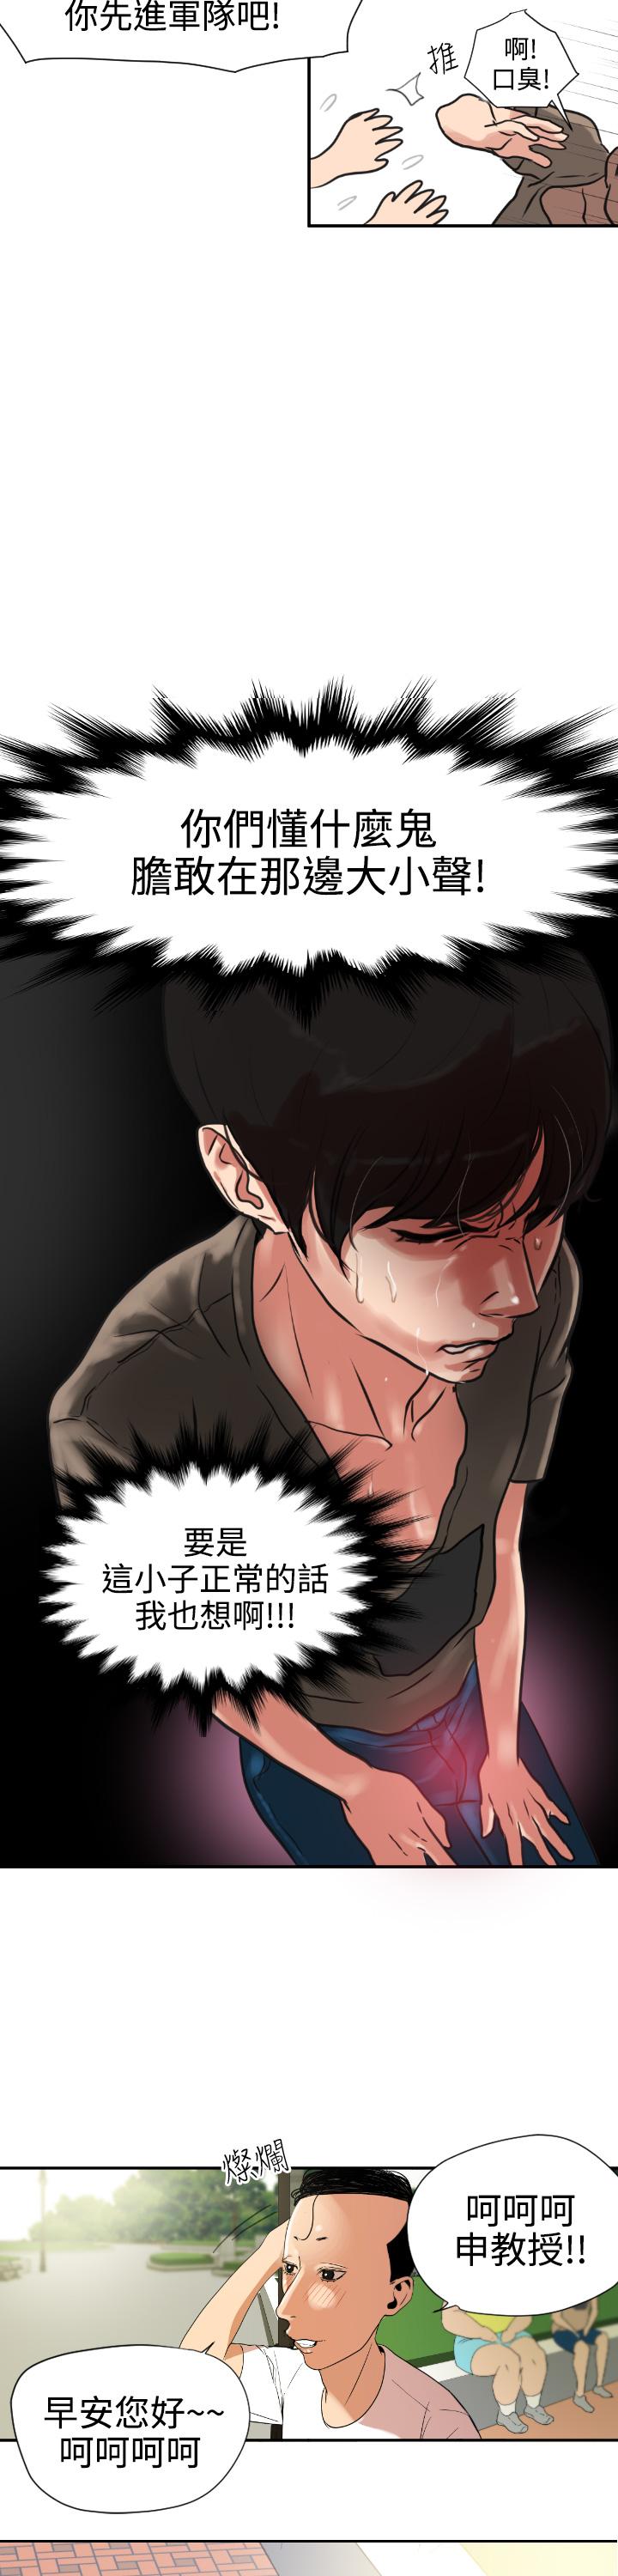 Desire King (慾求王) Ch.1-7 (chinese) 13